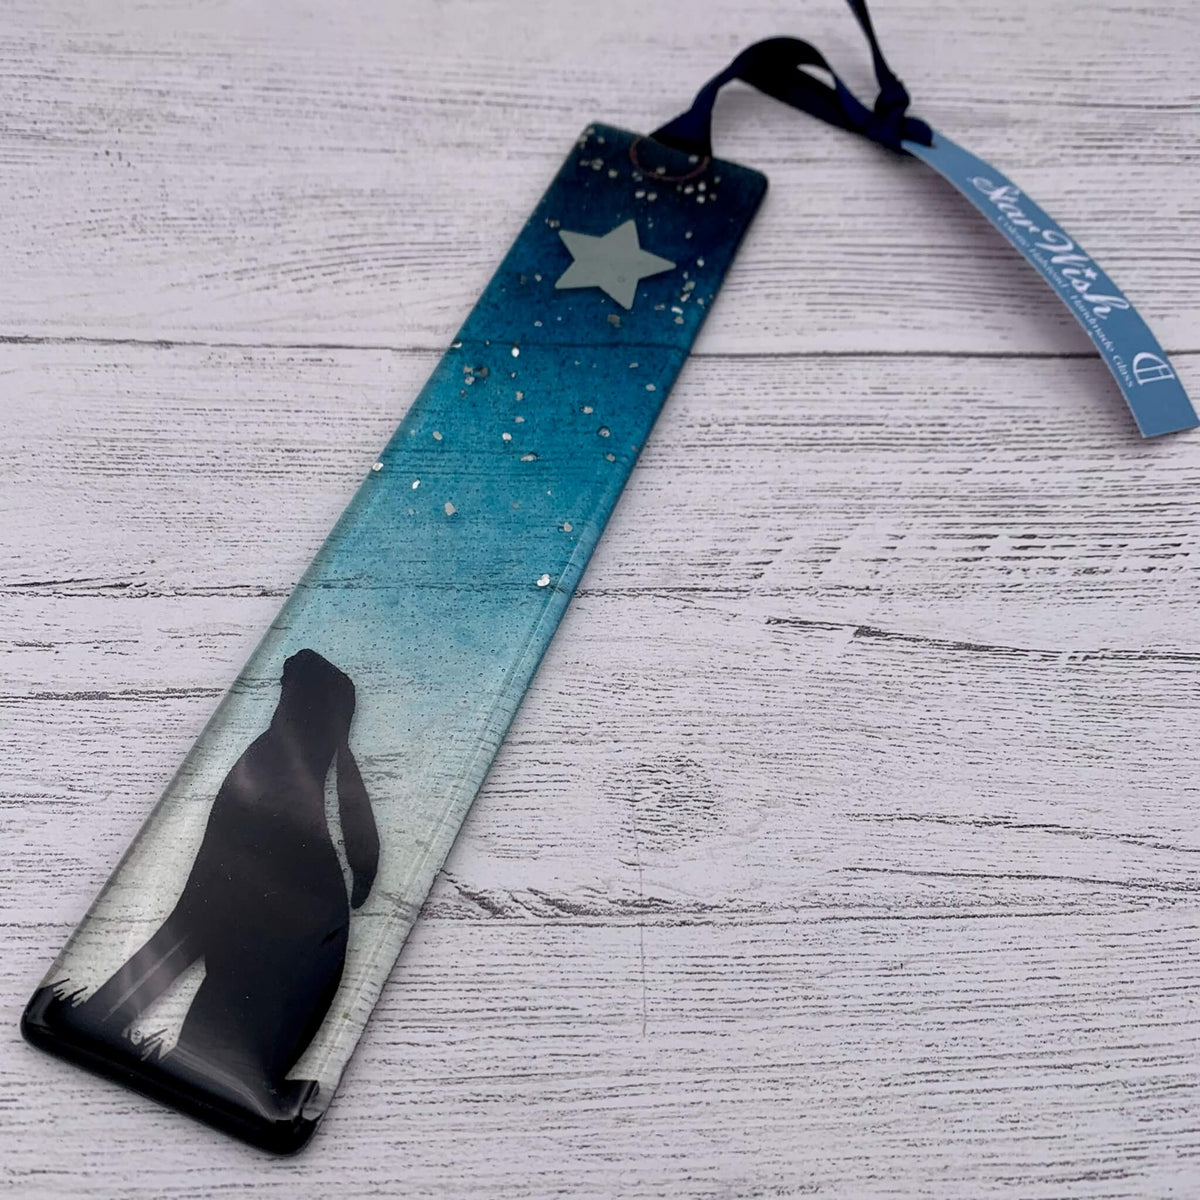 Handcrafted blue fused glass wish stick, with a star at the top and glitter.  